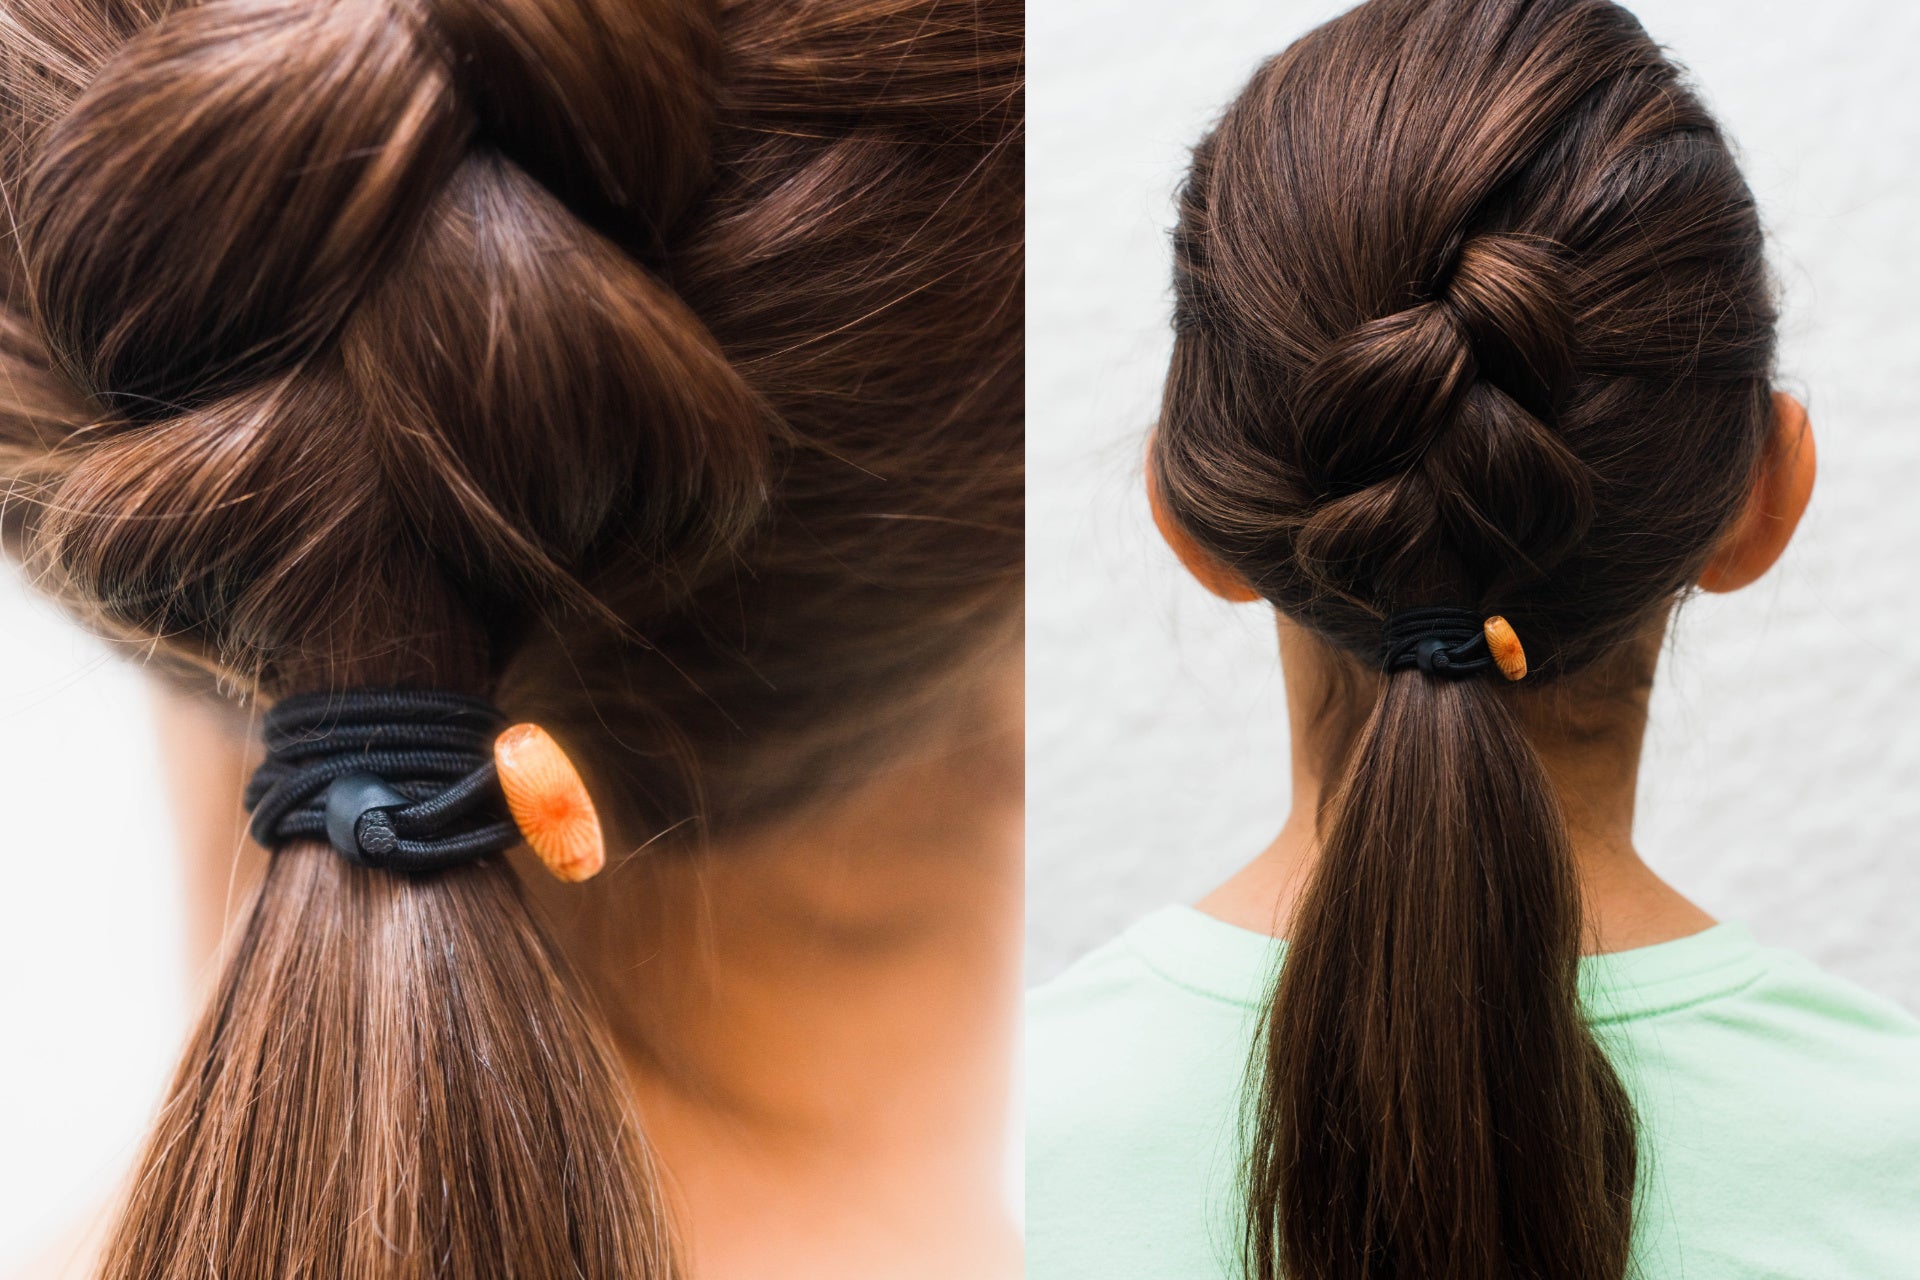 Load video: Using Emio hair ties to secure your braids